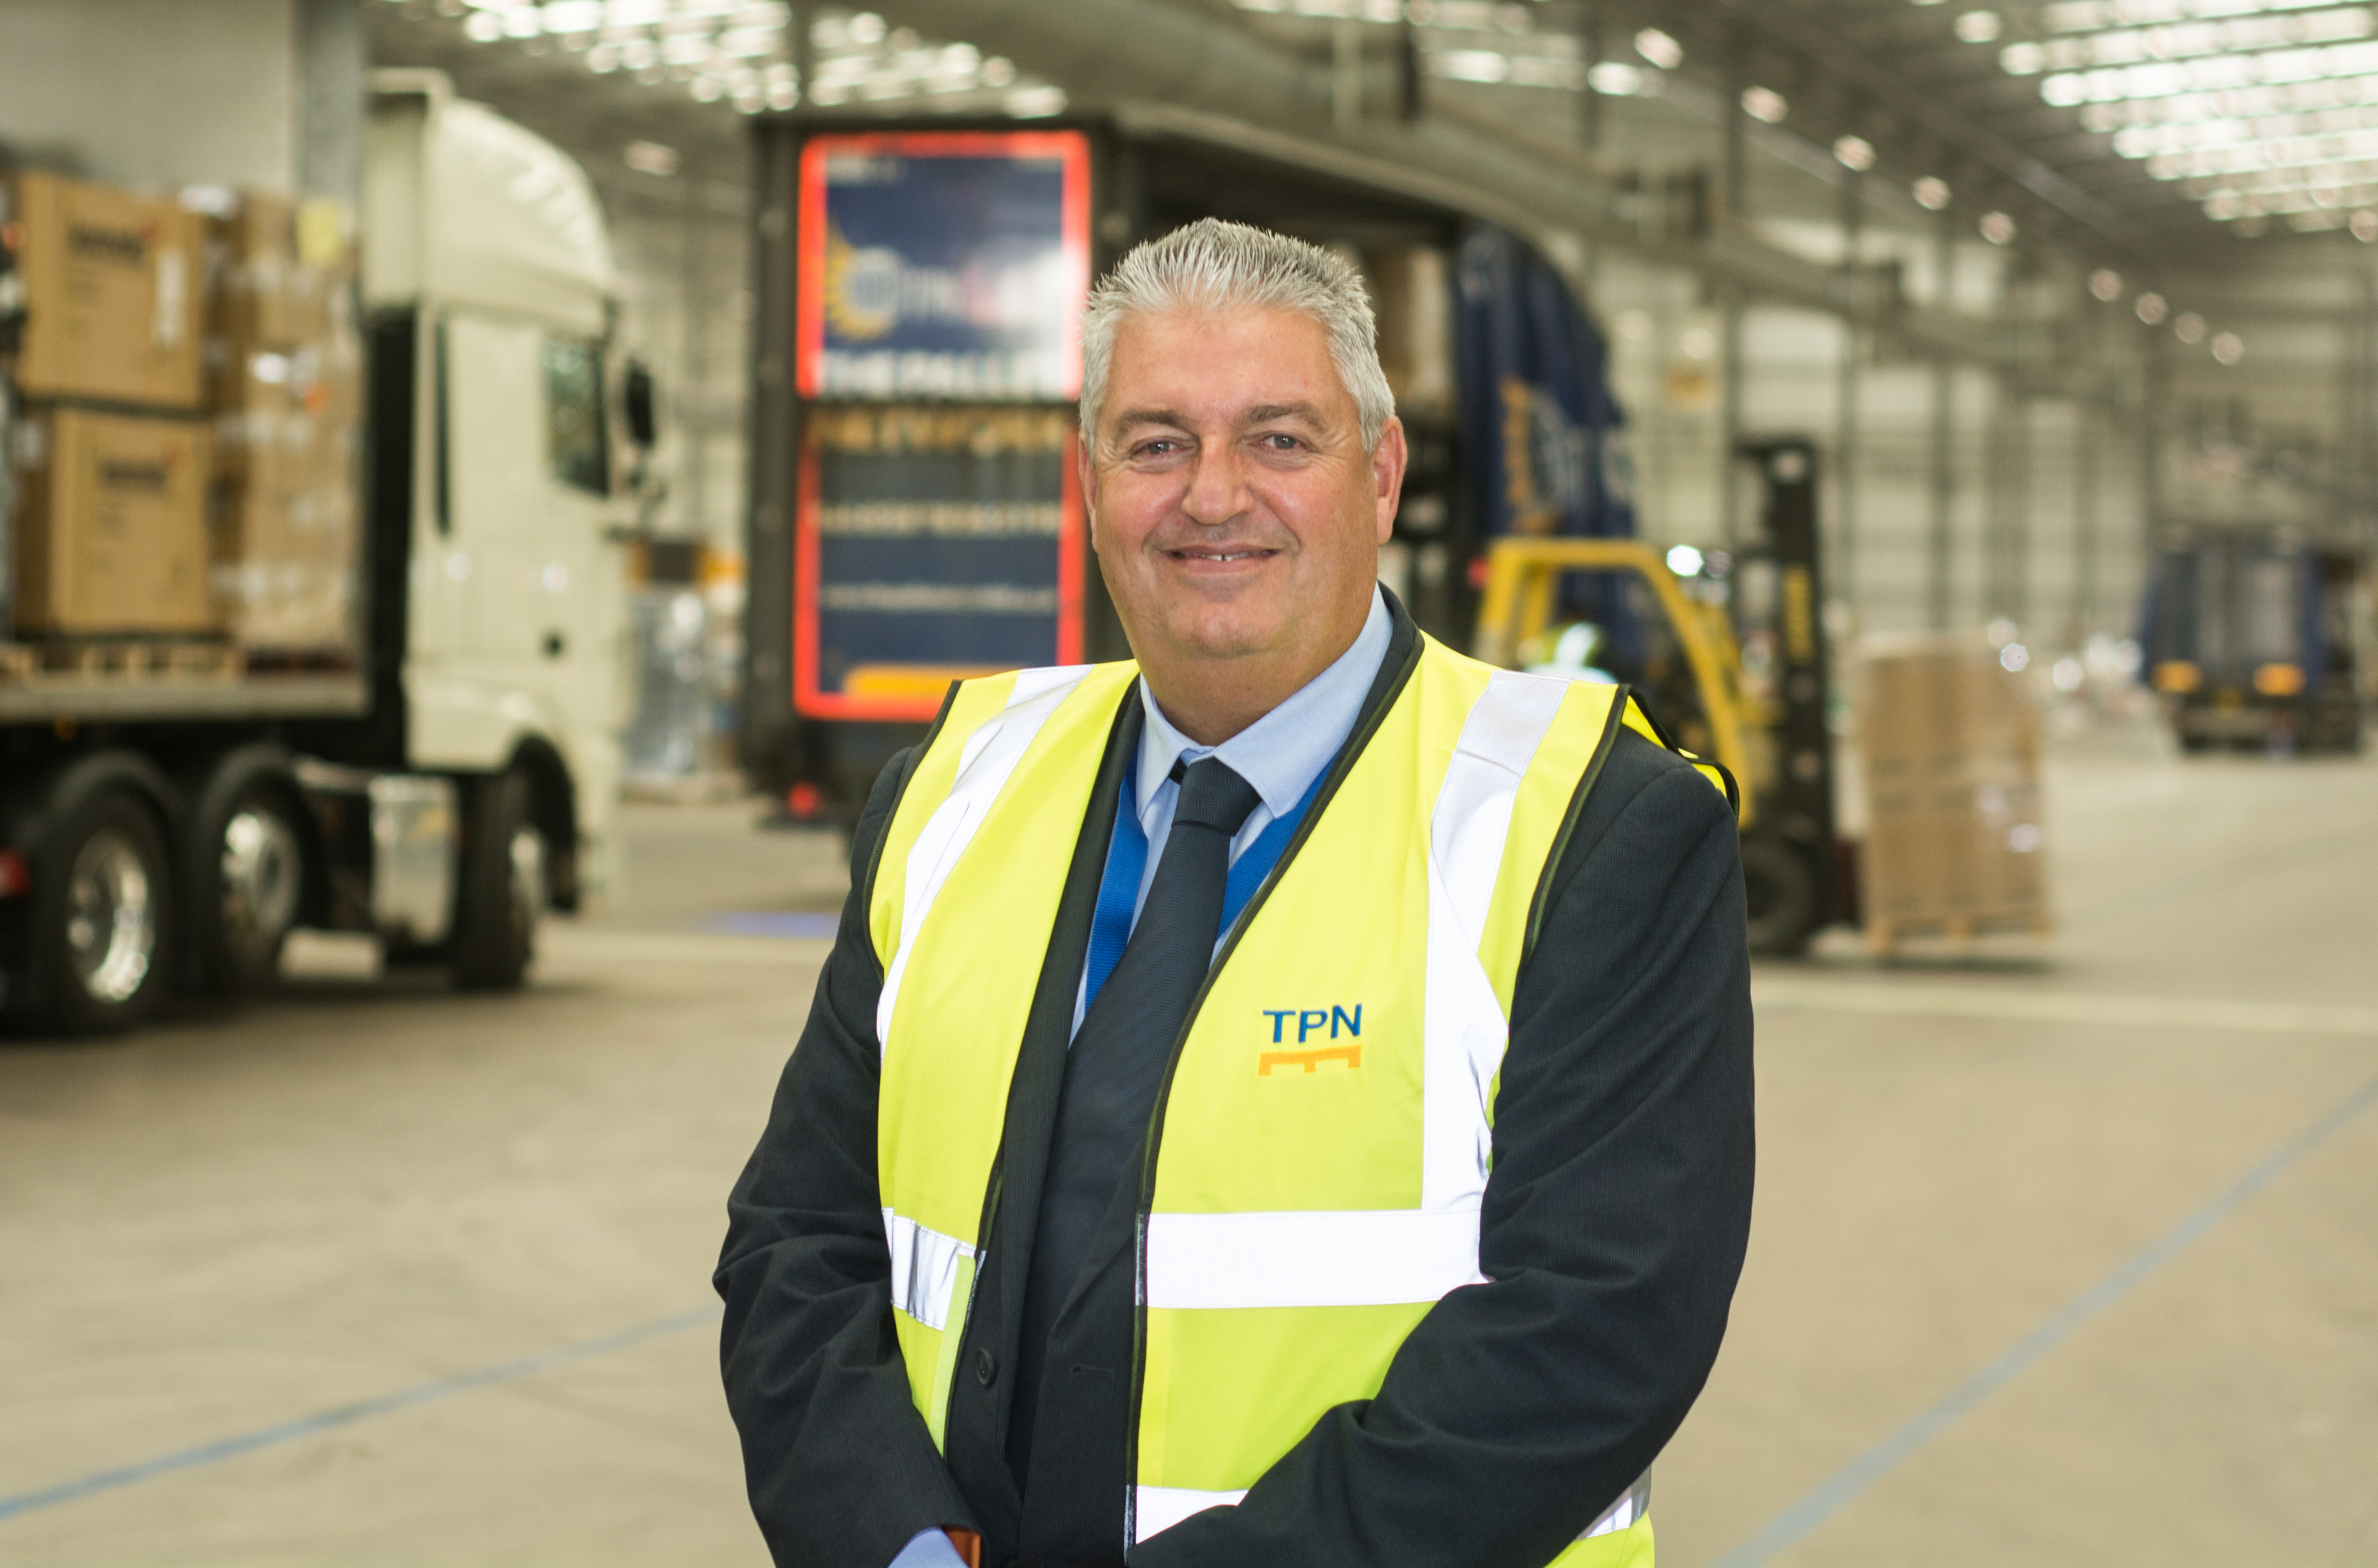 TPN boosts operations team with highly experienced director